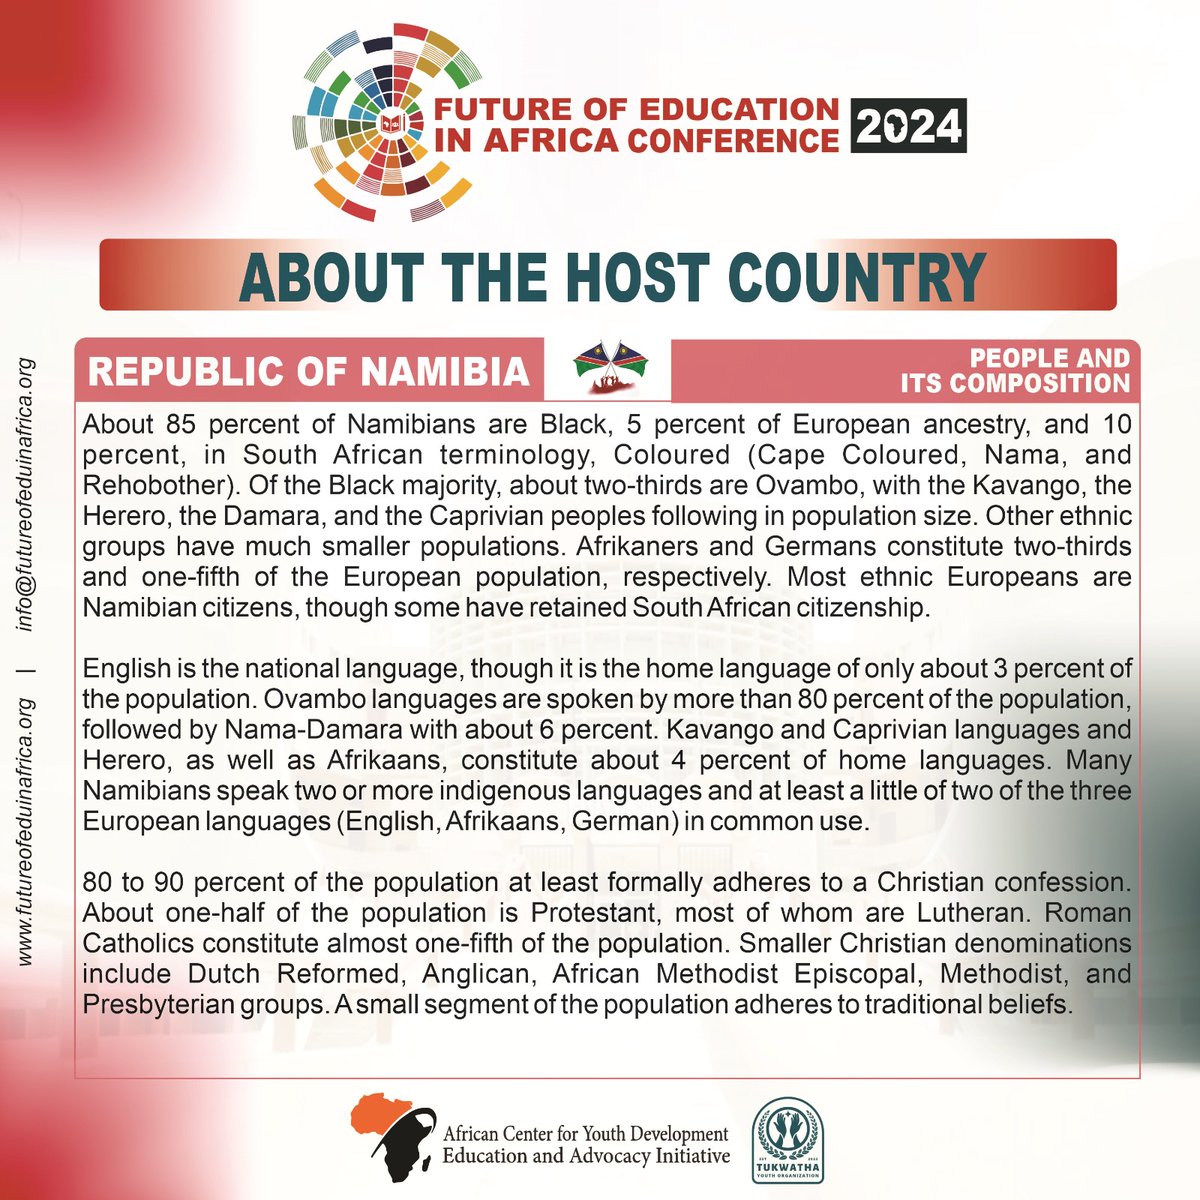 I'm sure you're curious to learn more about the host country for the 3rd Edition of the Annual Future of Education in Africa Conference 2024 - Namibia. Please take a look at the slides. transformative experience in African education. #futureofeducinafrica #qualityeducation